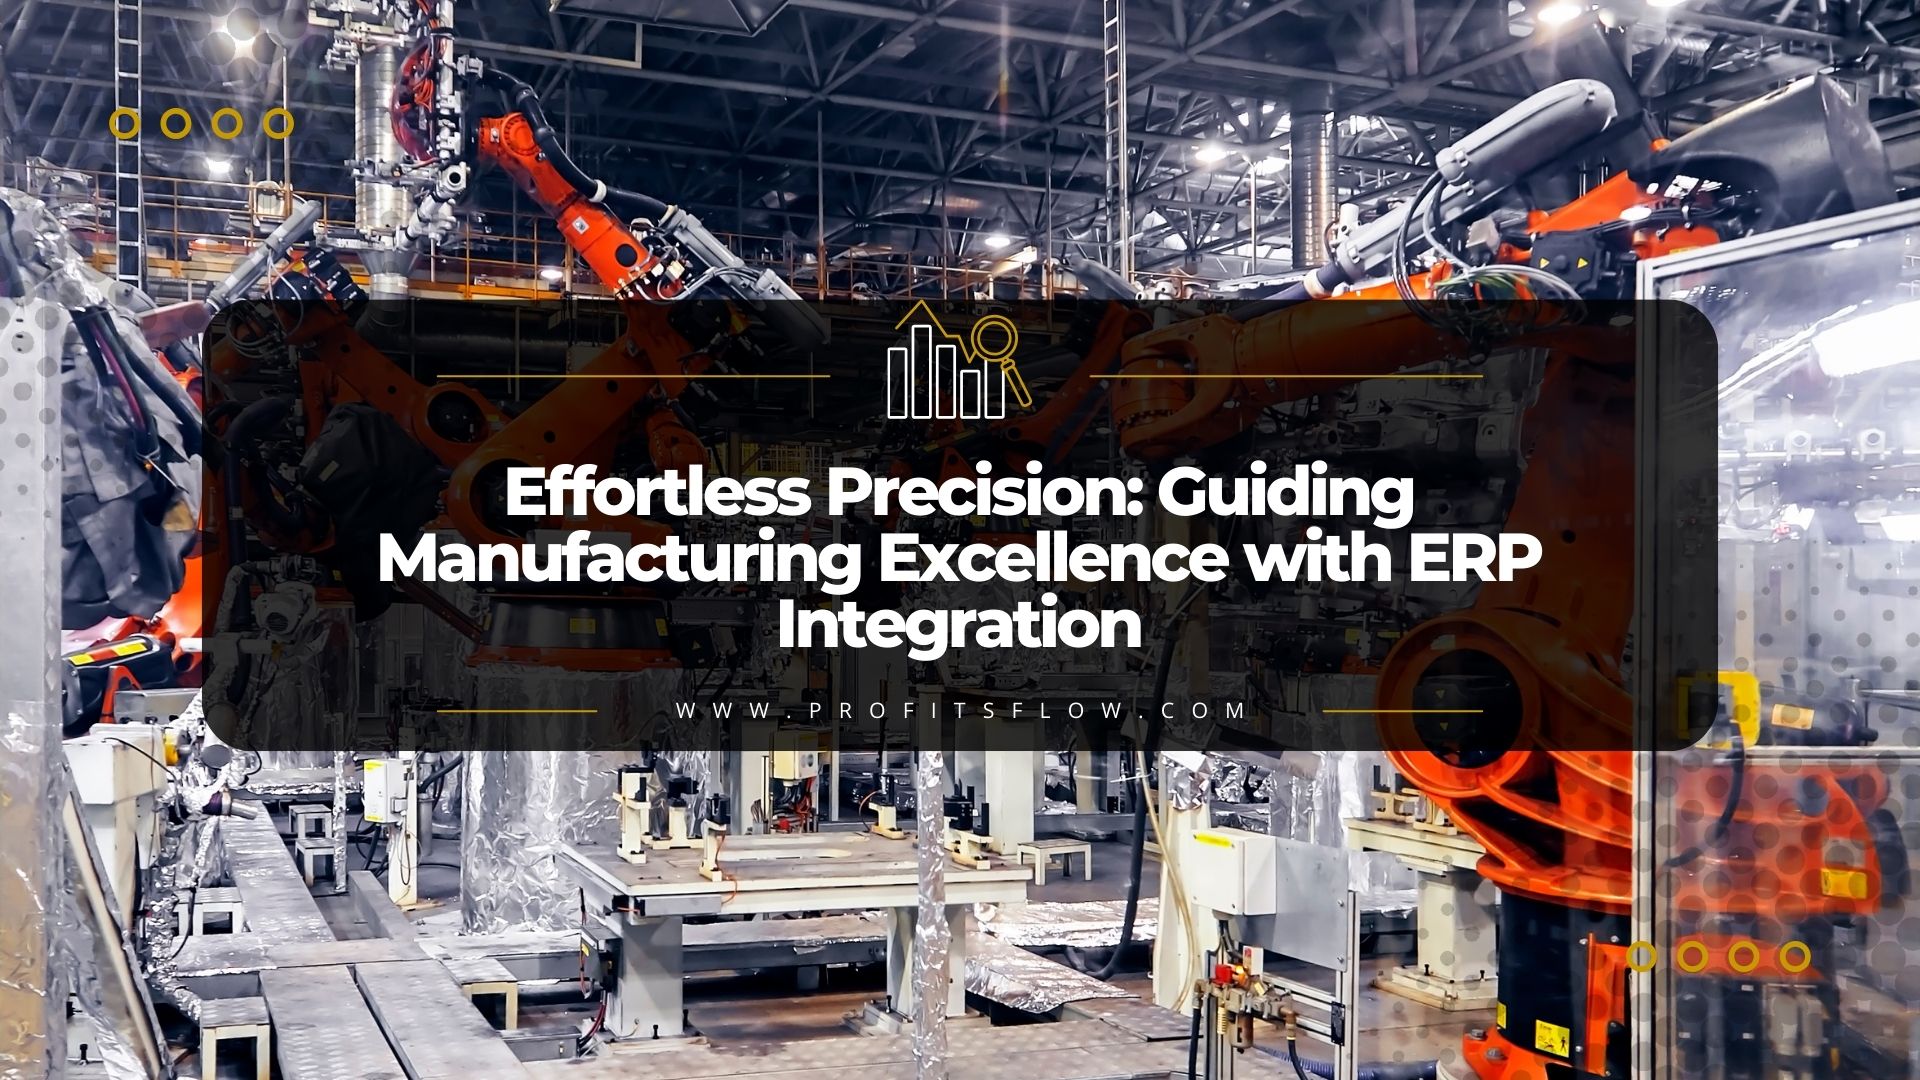 Effortless Precision: Guiding Manufacturing Excellence with ERP Integration